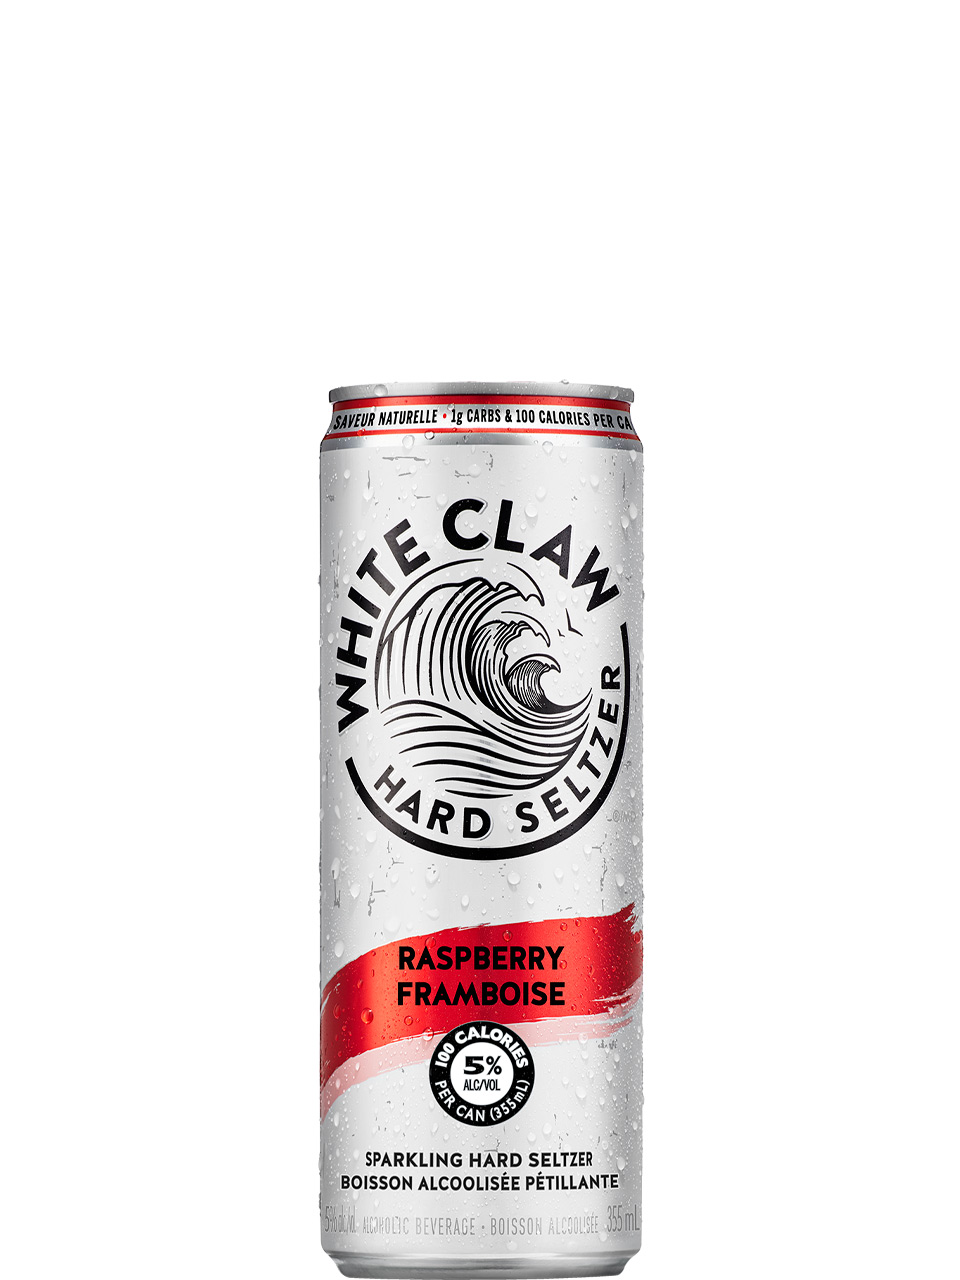 White Claw Raspberry 6 Pack Cans